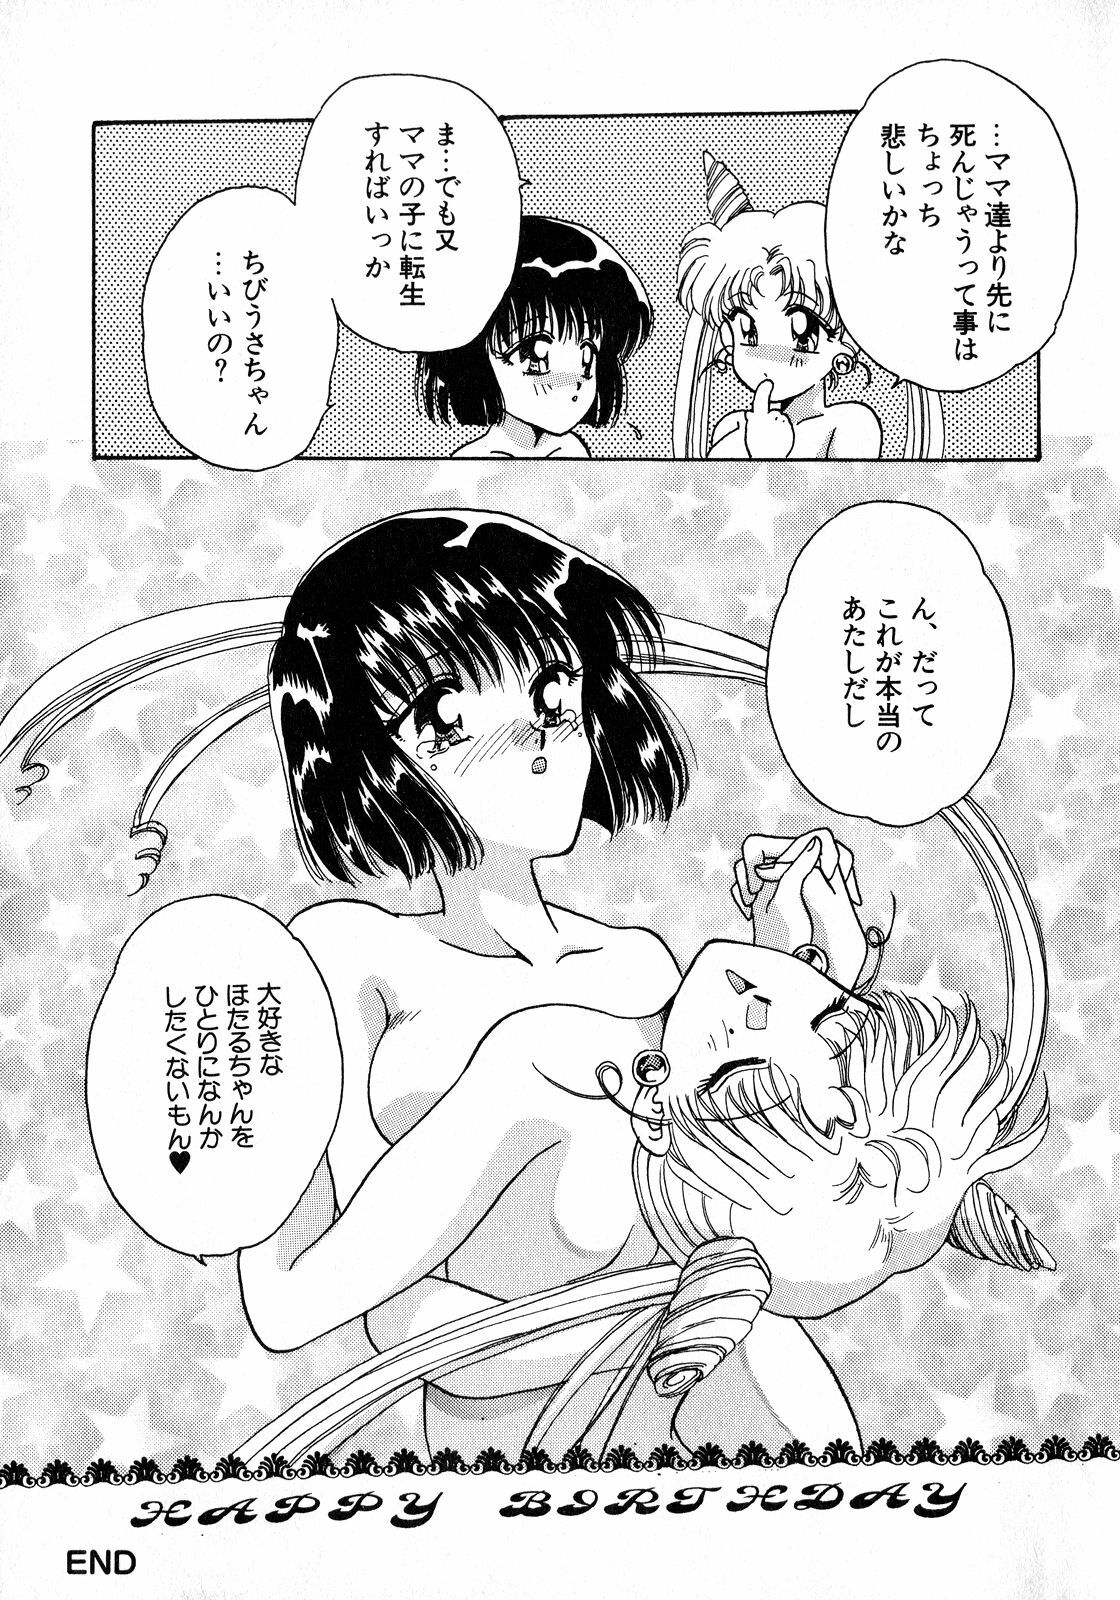 [Anthology] Lunatic Party 8 (Sailor Moon) page 20 full